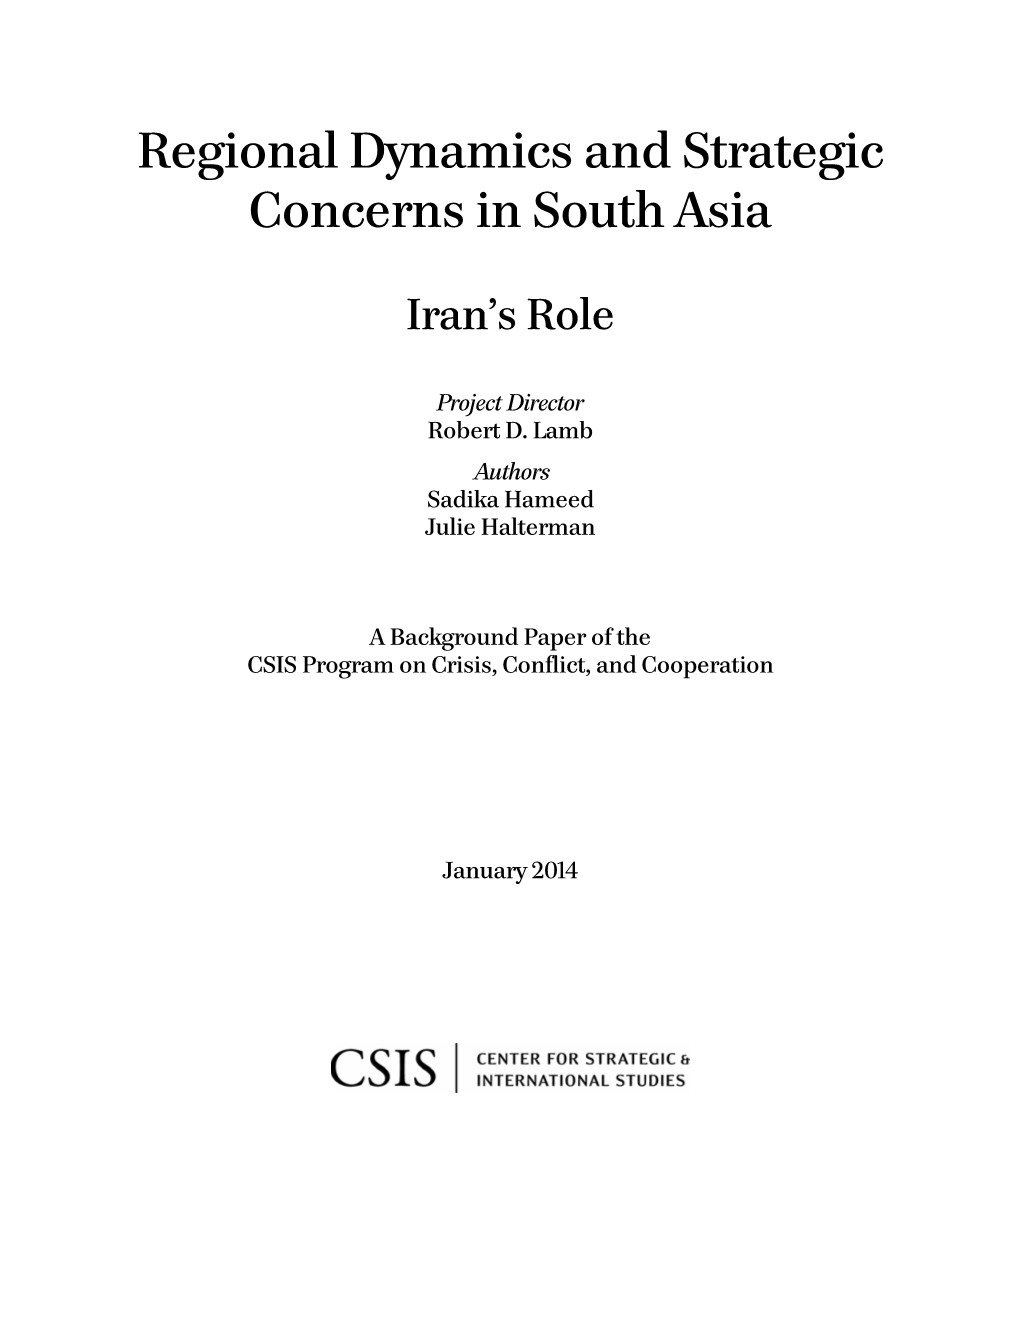 Regional Dynamics and Strategic Concerns in South Asia: Iran's Role